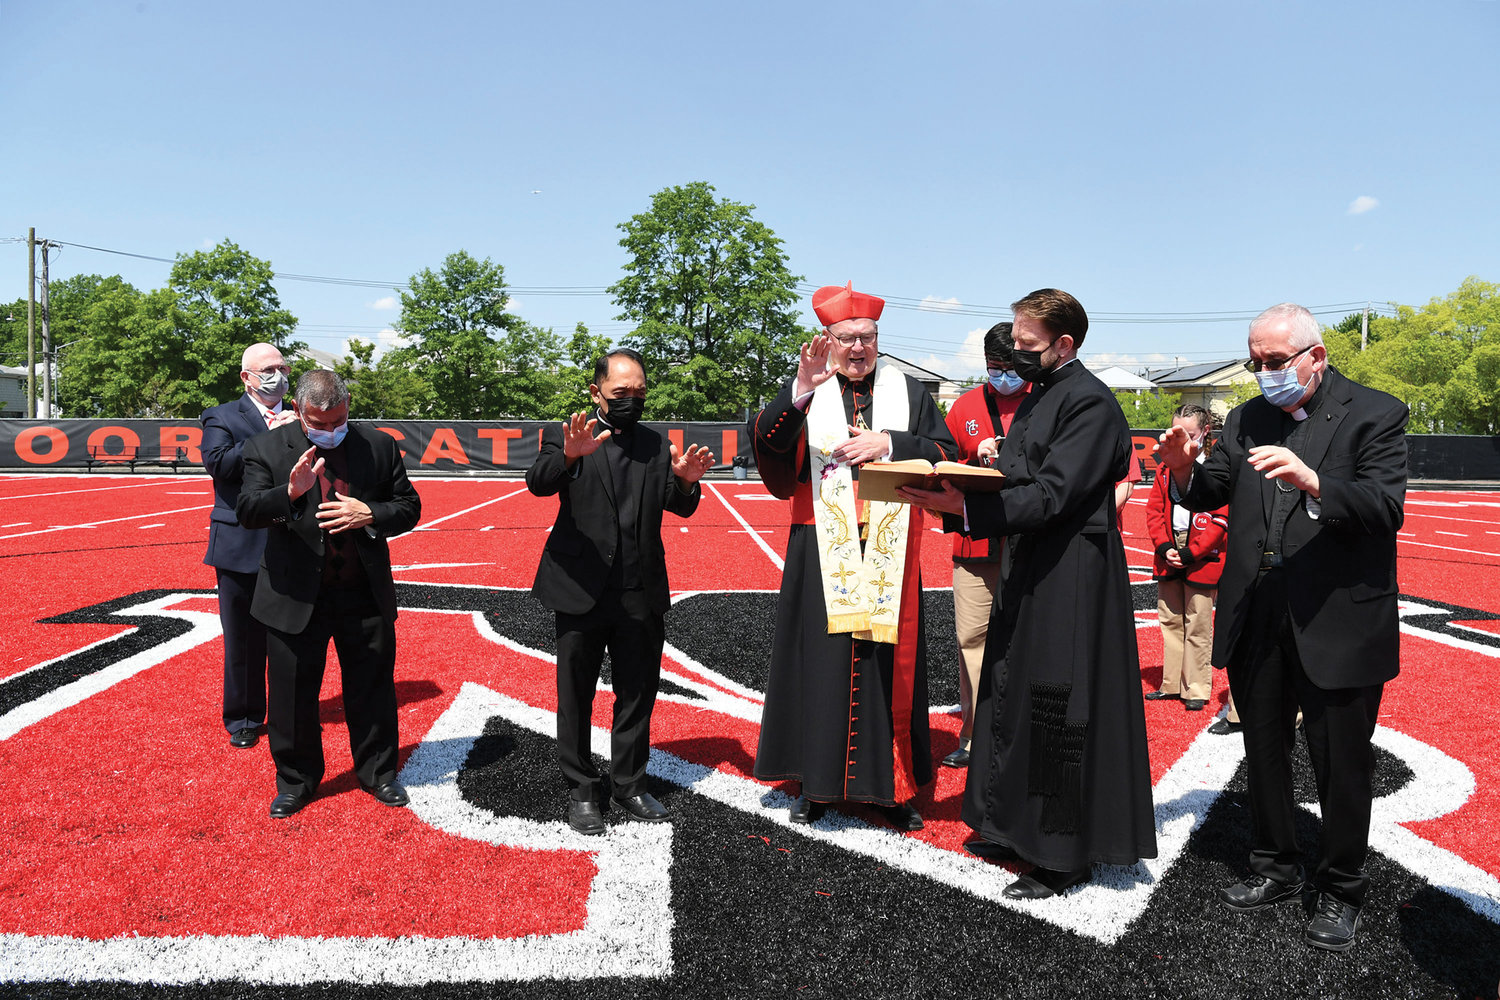 The cardinal blesses the school’s new athletic field which now boasts a red turf. Joining him are Michael Deegan; Father Eugene Carrella, an alumnus of the school and pastor of St. Rita parish on Staten Island; Father Rhey Garcia, the school chaplain; Father Stephen Ries, priest secretary to the cardinal and Retired Auxiliary Bishop John O’Hara. The cardinal also blessed the former library which has been repurposed as a Student Collaboration Center with new furnishings and state-of-the-art technology.